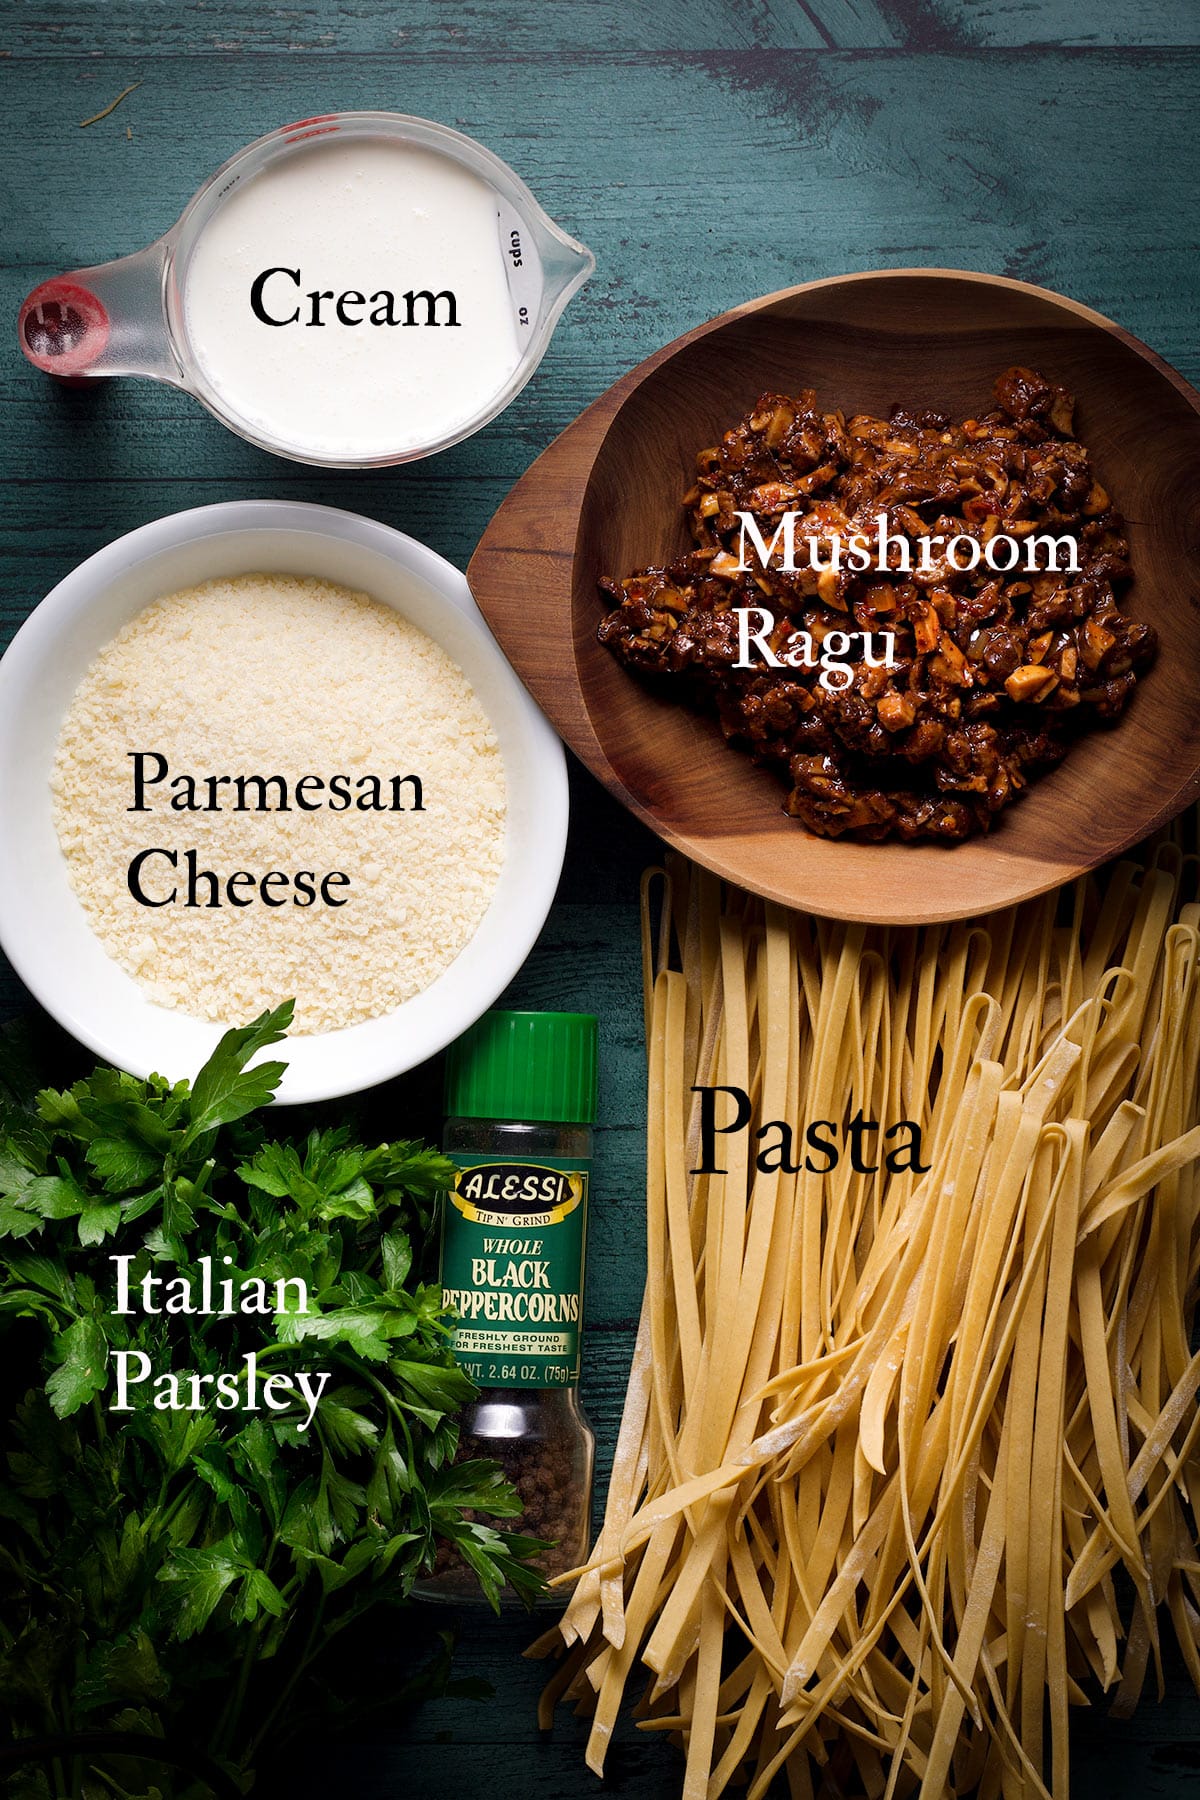 All the ingredients needed to make creamy mushroom pasta.